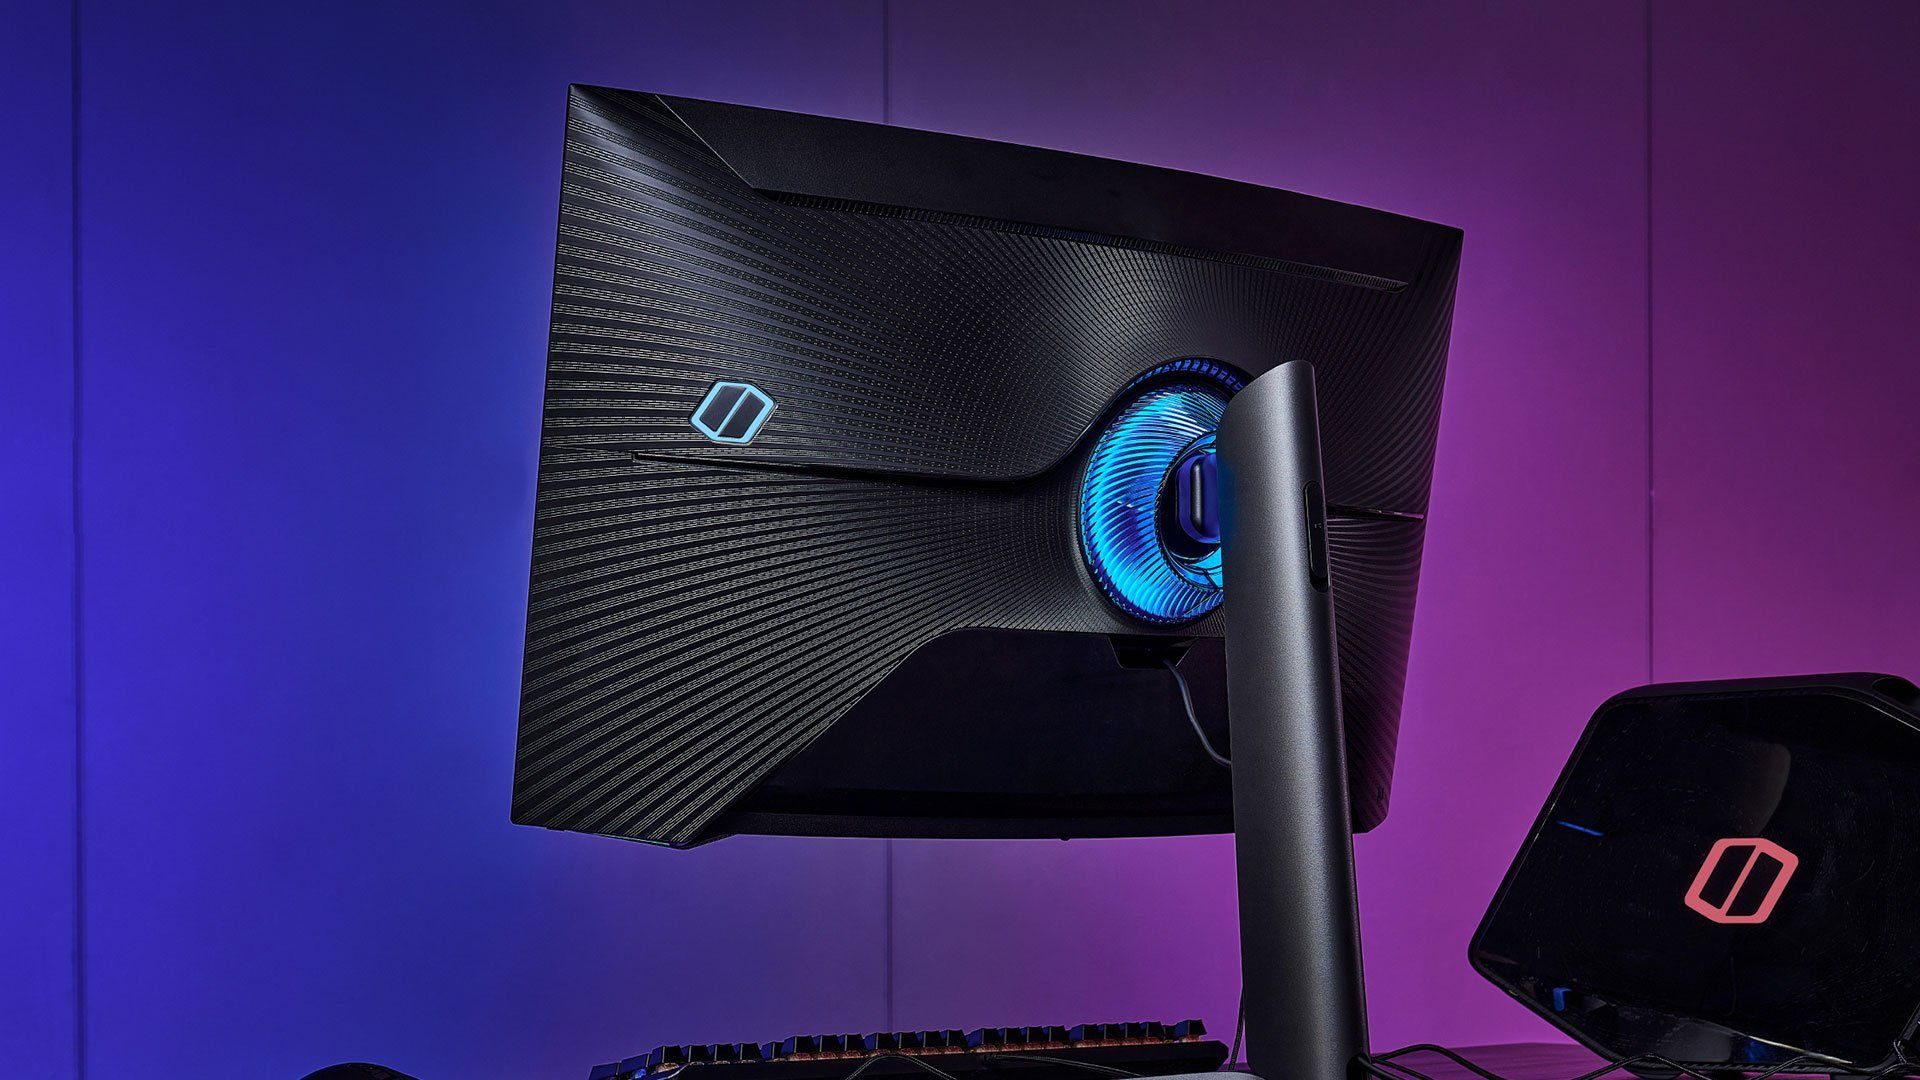 Samsung Odyssey G7 Curved Gaming Monitor Launched Globally